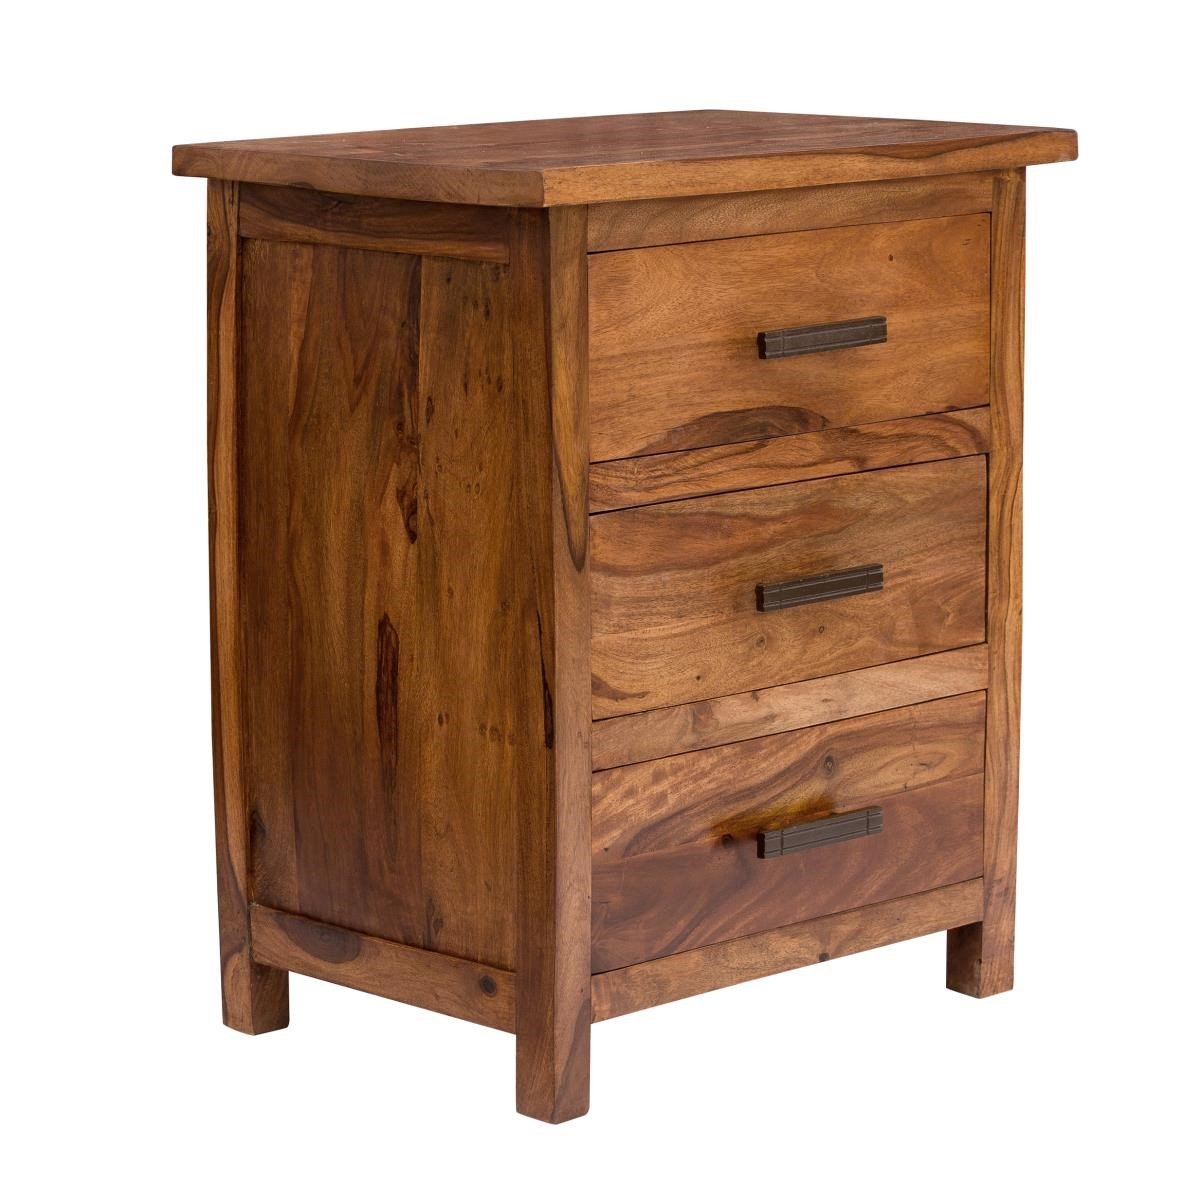 Wooden Bedside table - Marigold Collection